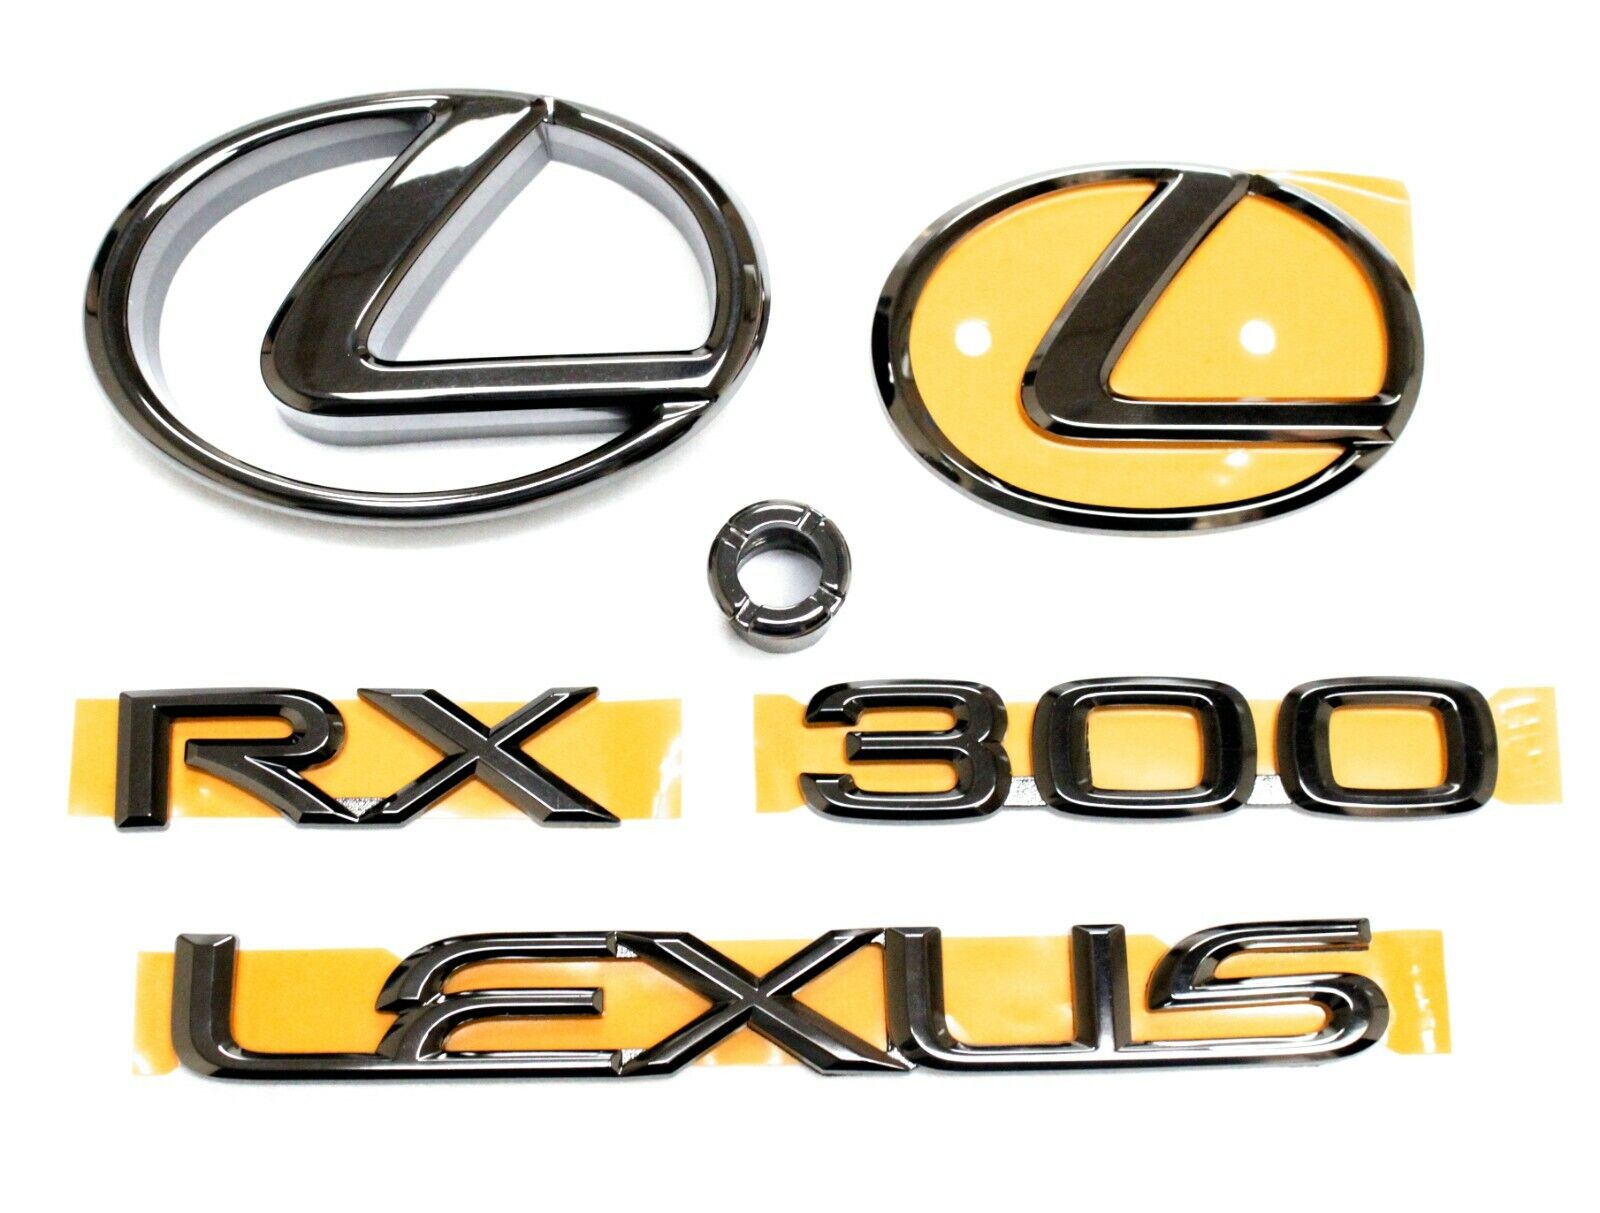 FOR 2001 2002 2003 LEXUS RX300 BLACK PEARL PLATED EMBLEM PACKAGE KIT